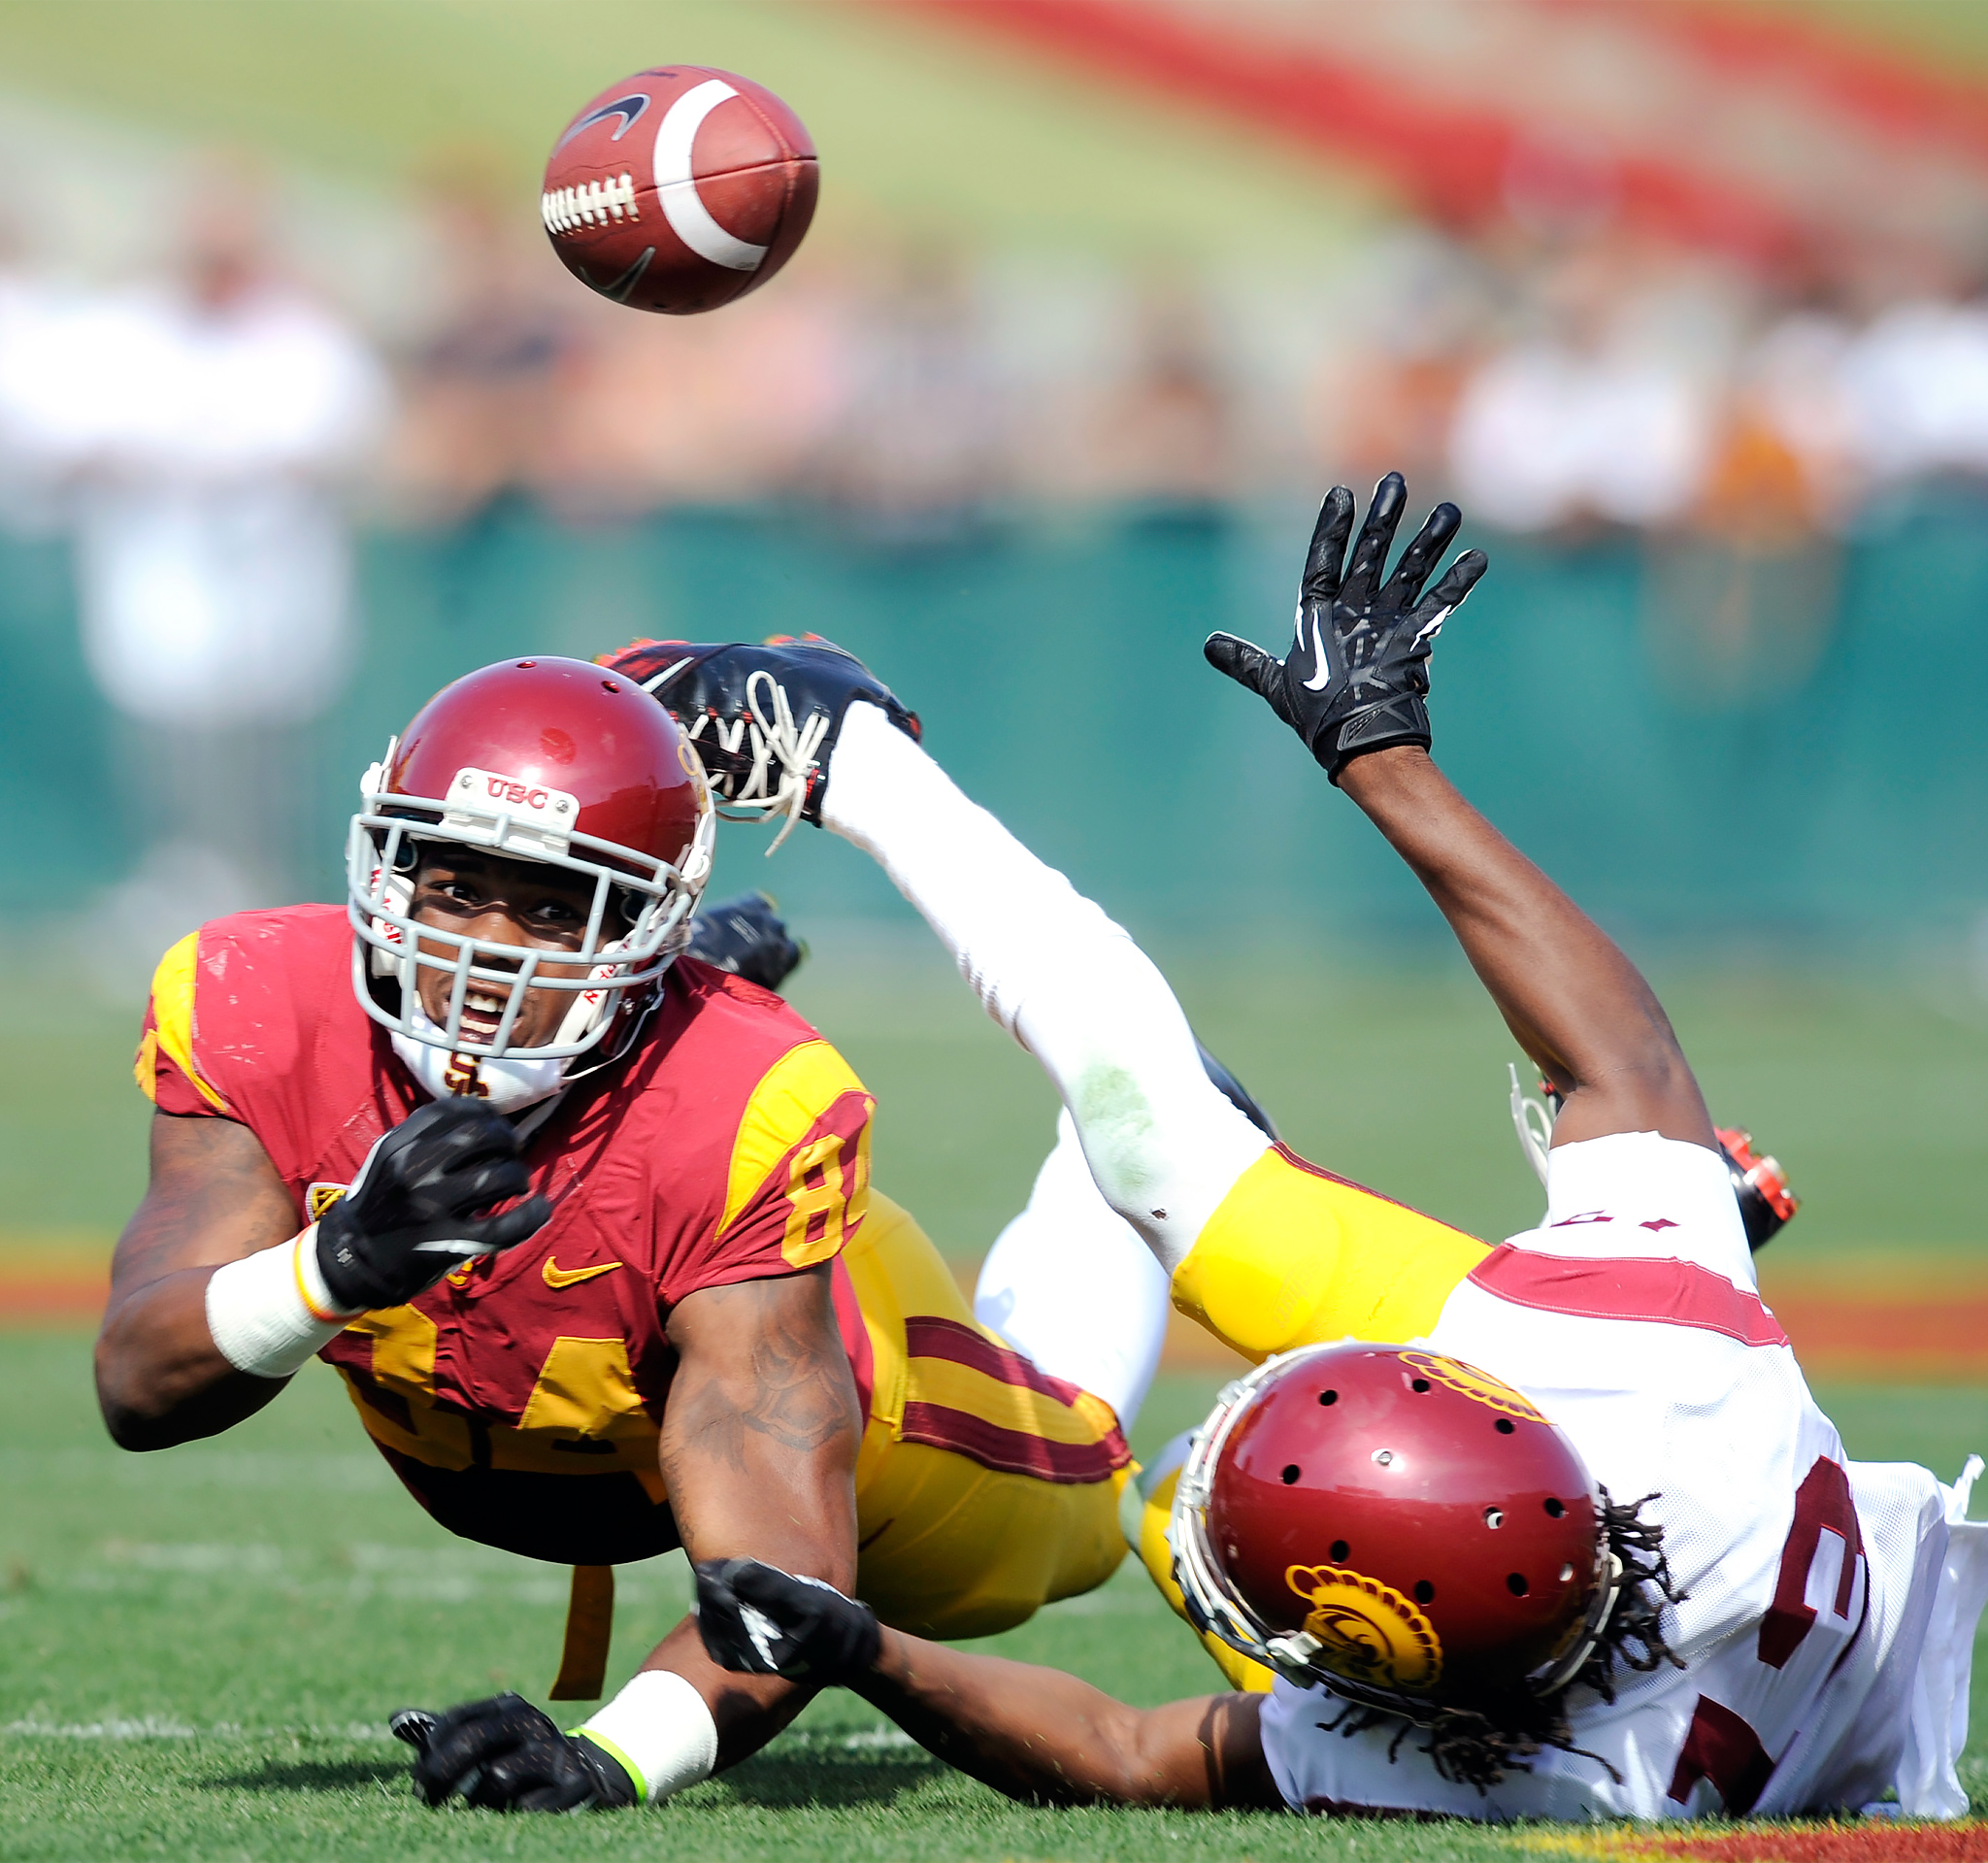 USC Trojans Gallery The best photos from spring football games